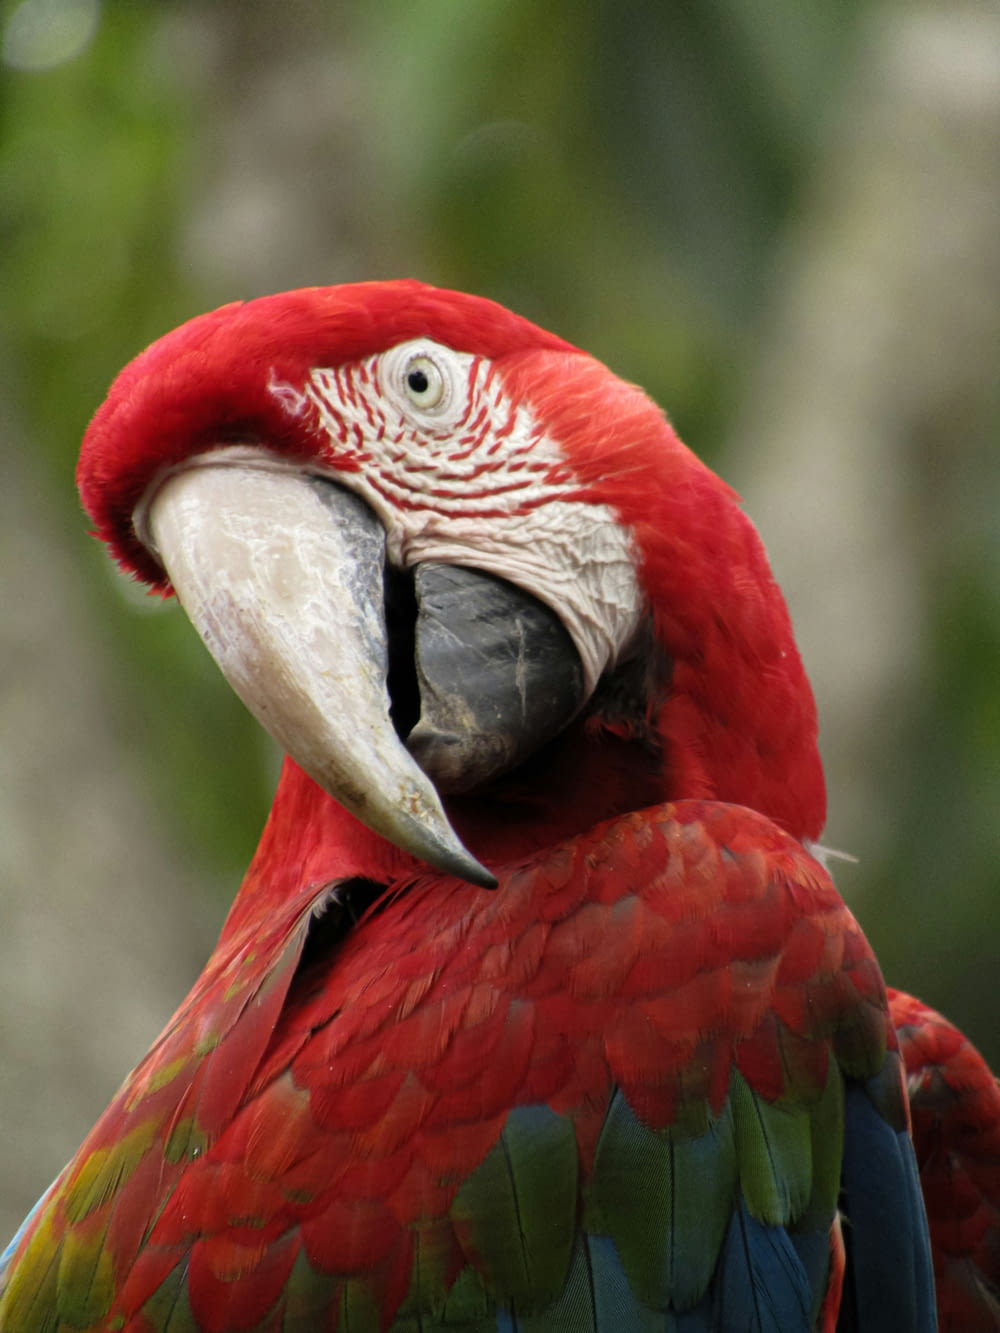 a close up of a red and green parrot